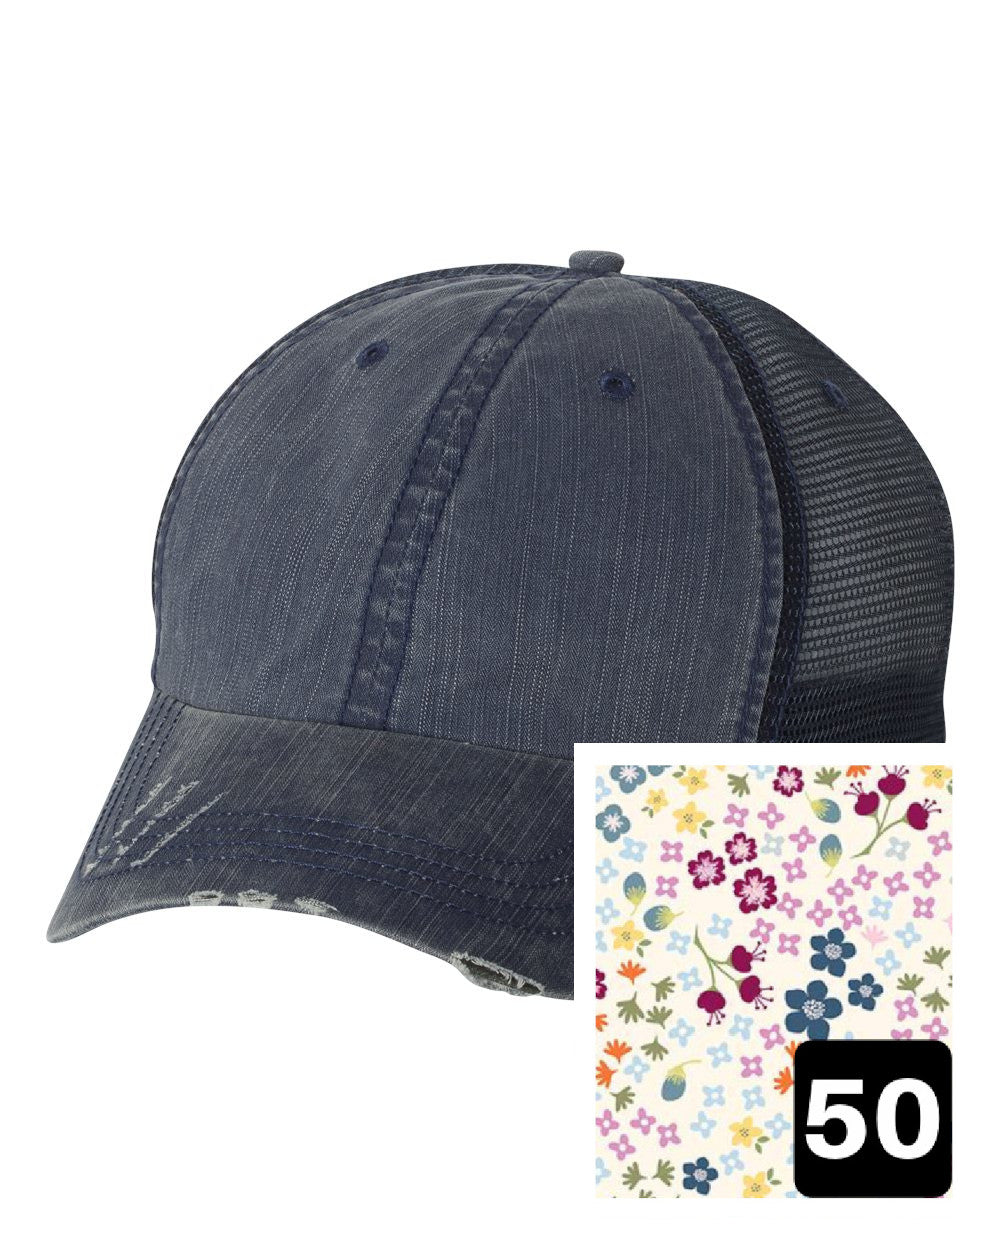 Maine Hat | Navy Distressed Trucker Cap | Many Fabric Choices